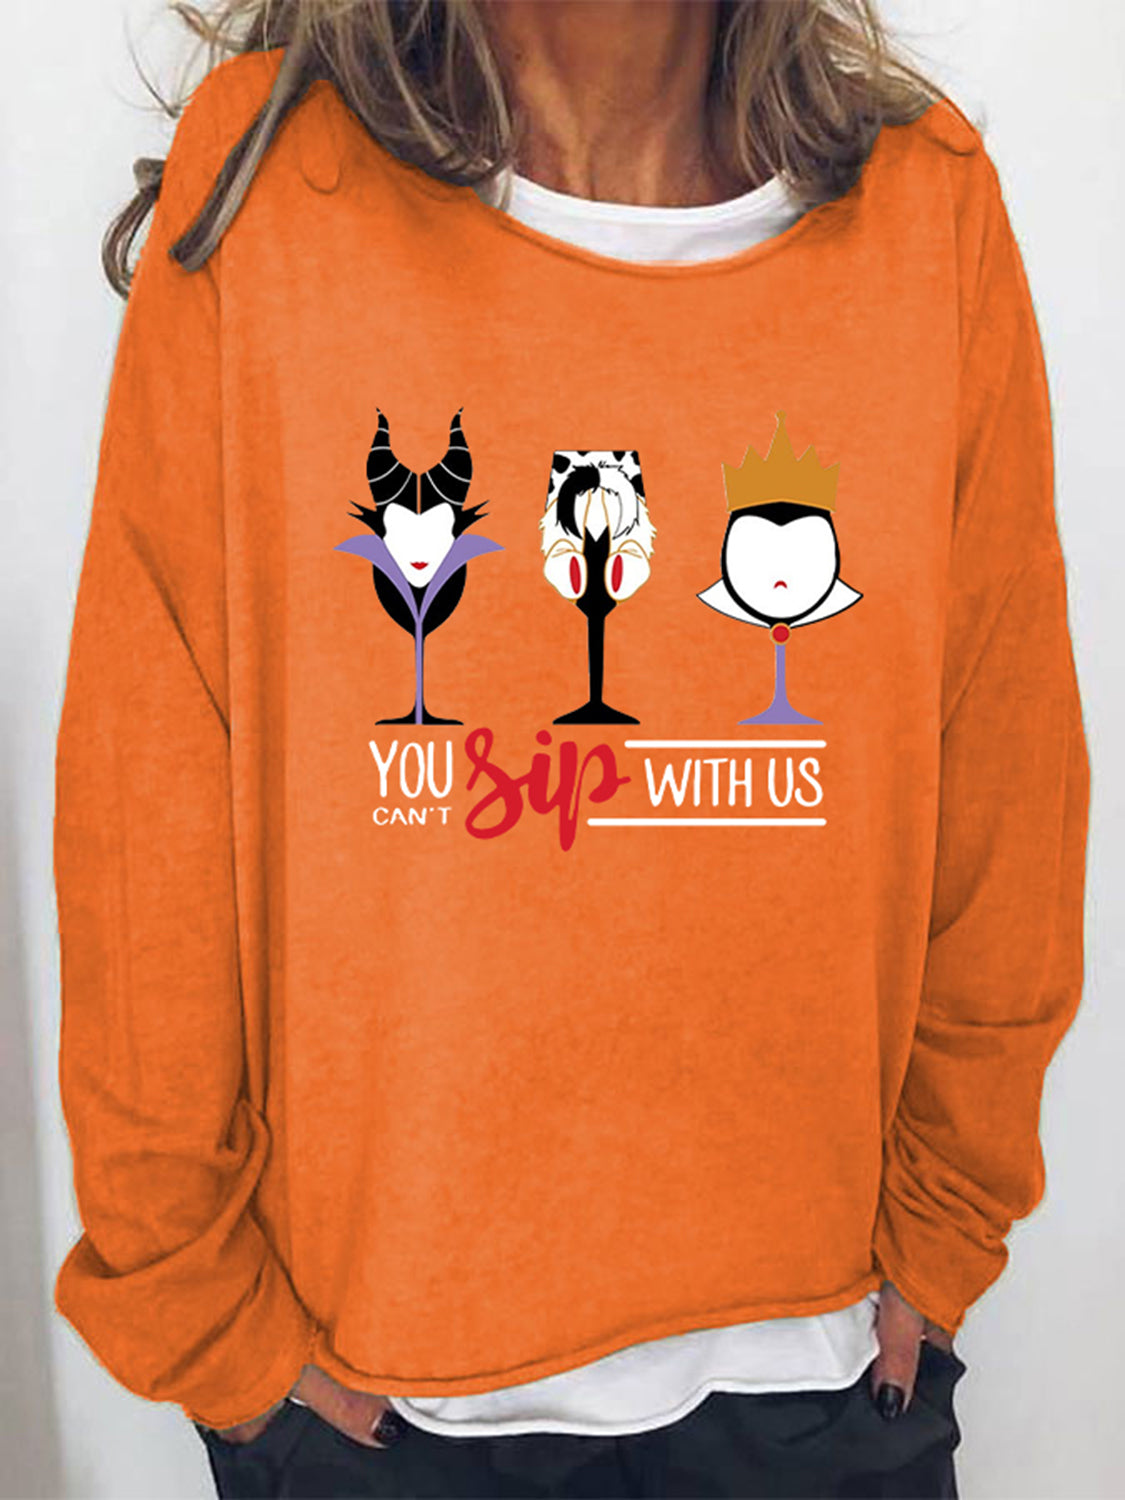 Full Size YOU CAN'T SIP WITH US Graphic Sweatshirt